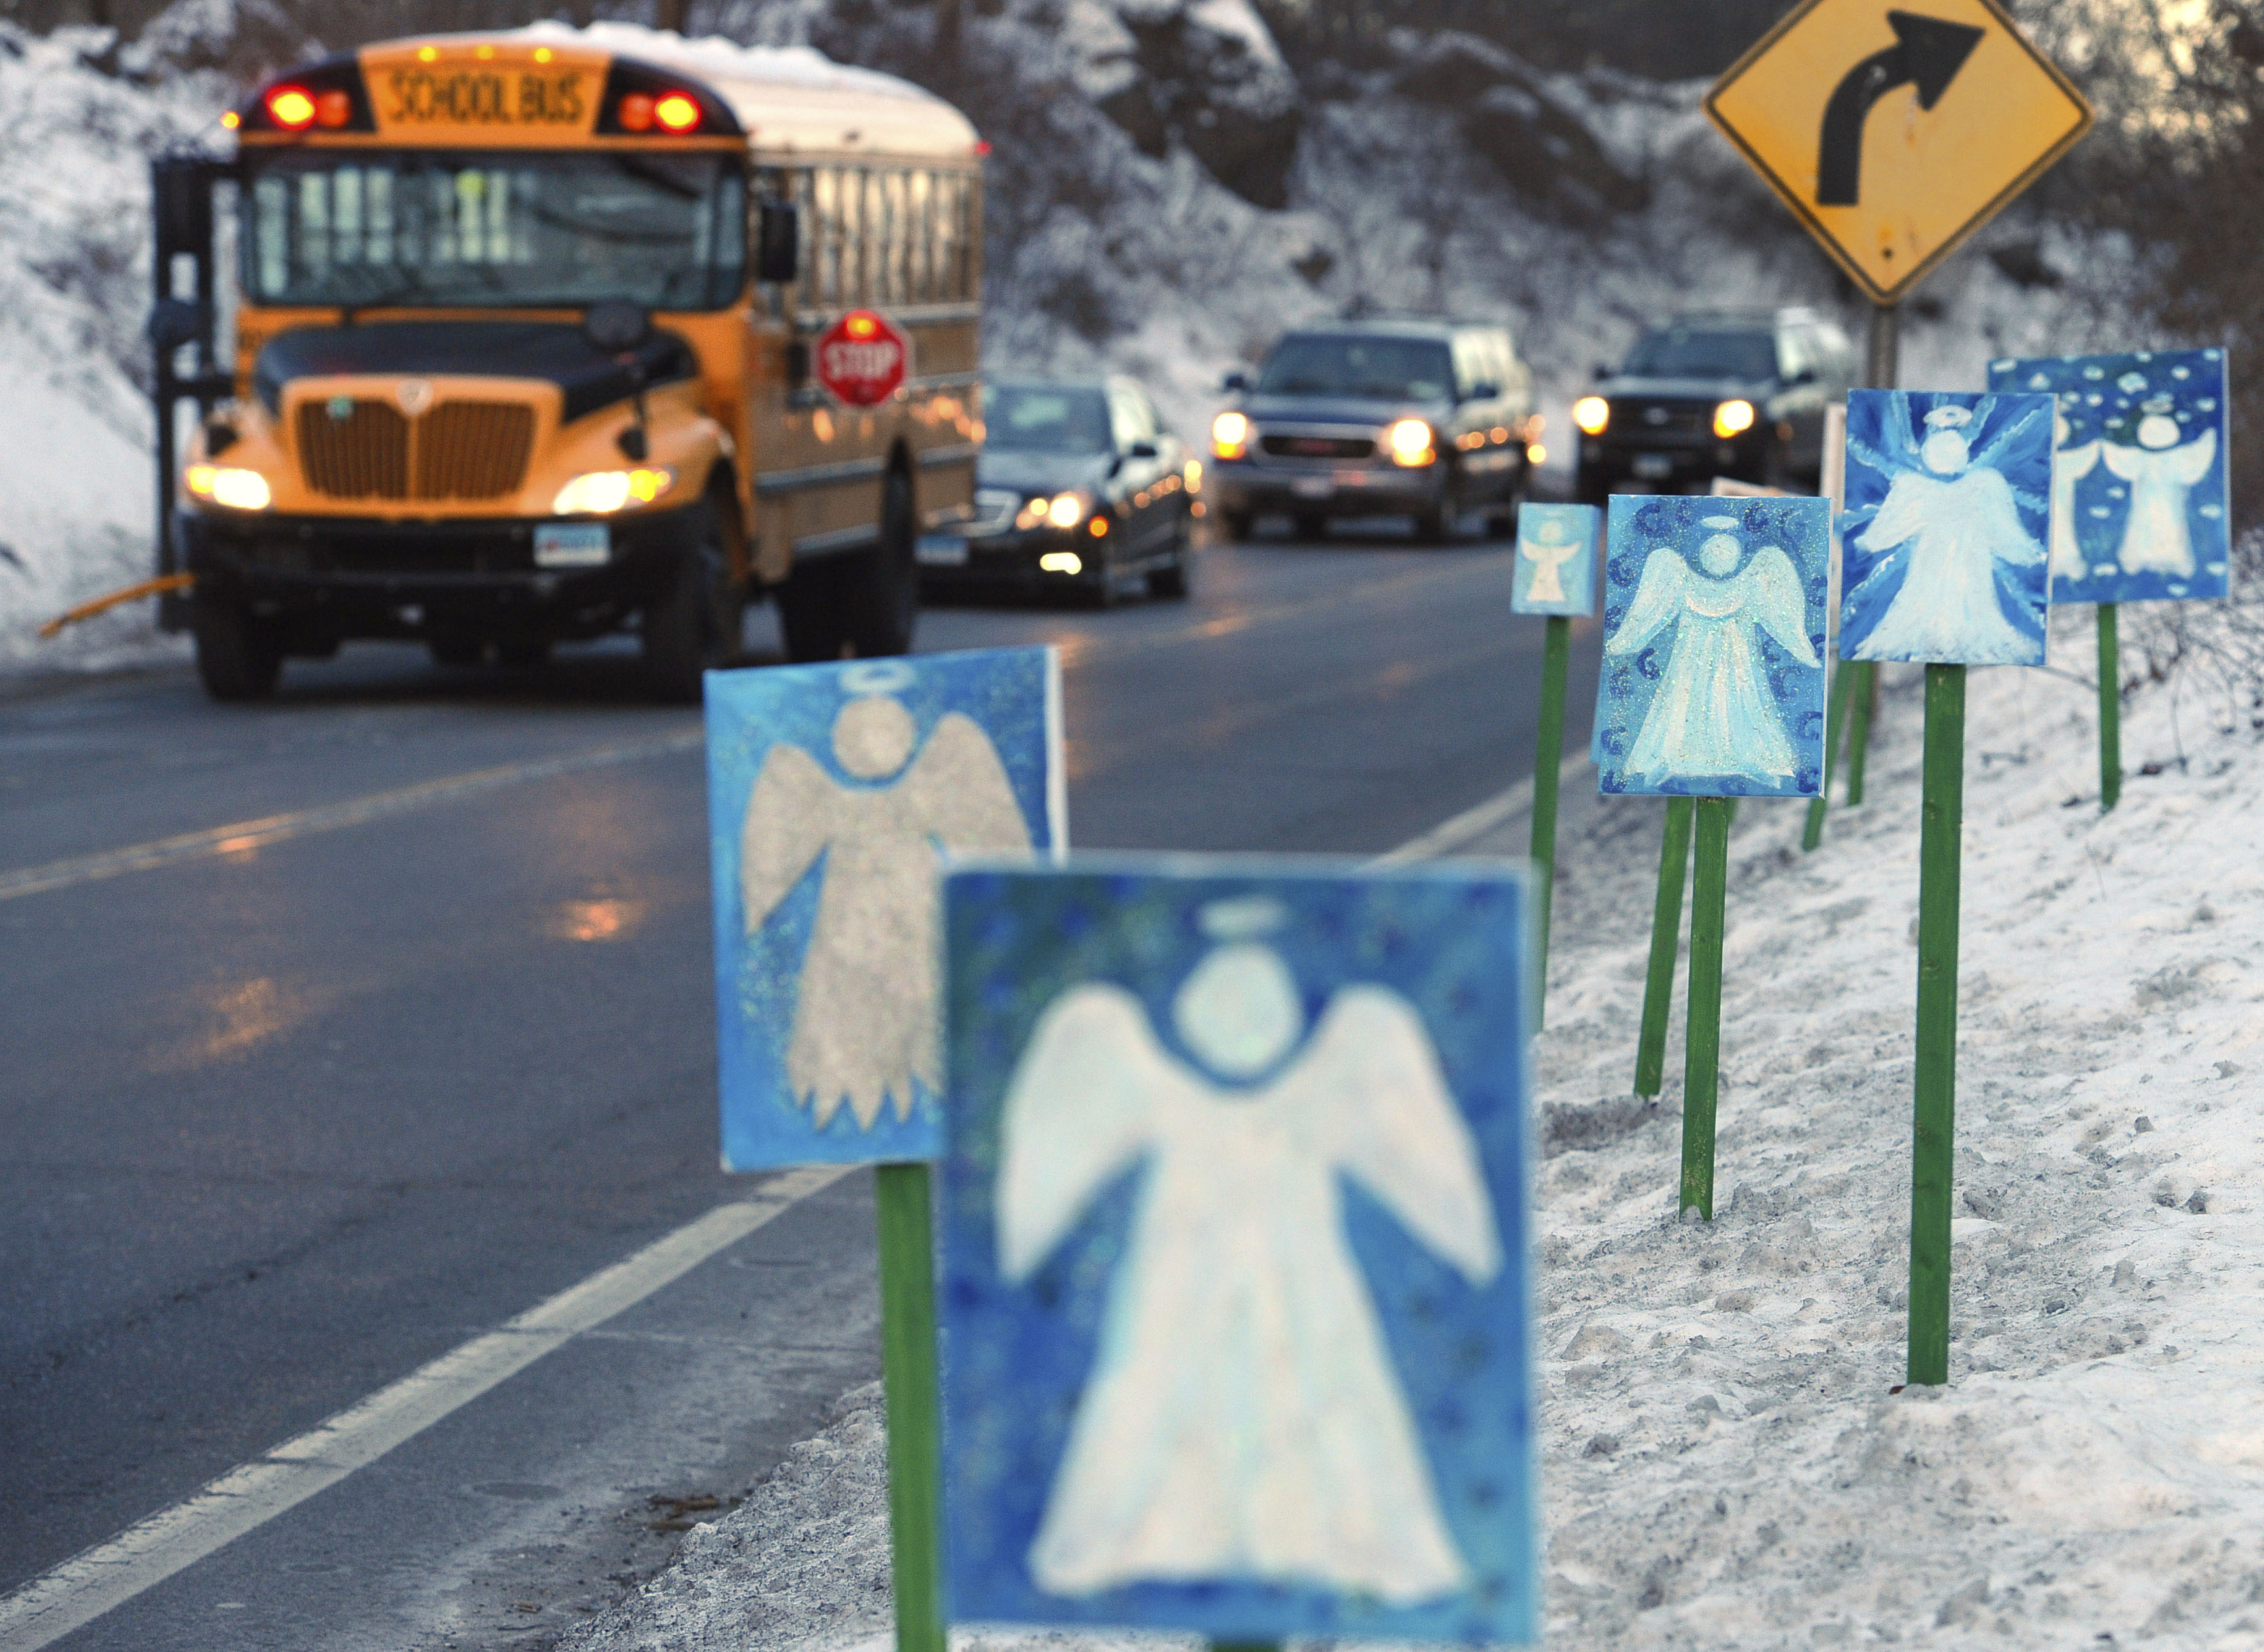 A bus traveling from Newtown, Conn., to Monroe stops near 26 angel signs posted along the roadside in Monroe, Conn., on Jan. 3, 2013, the first day of classes for Sandy Hook Elementary School students since the Dec. 14, 2012, shooting. (Jessica Hill—AP)